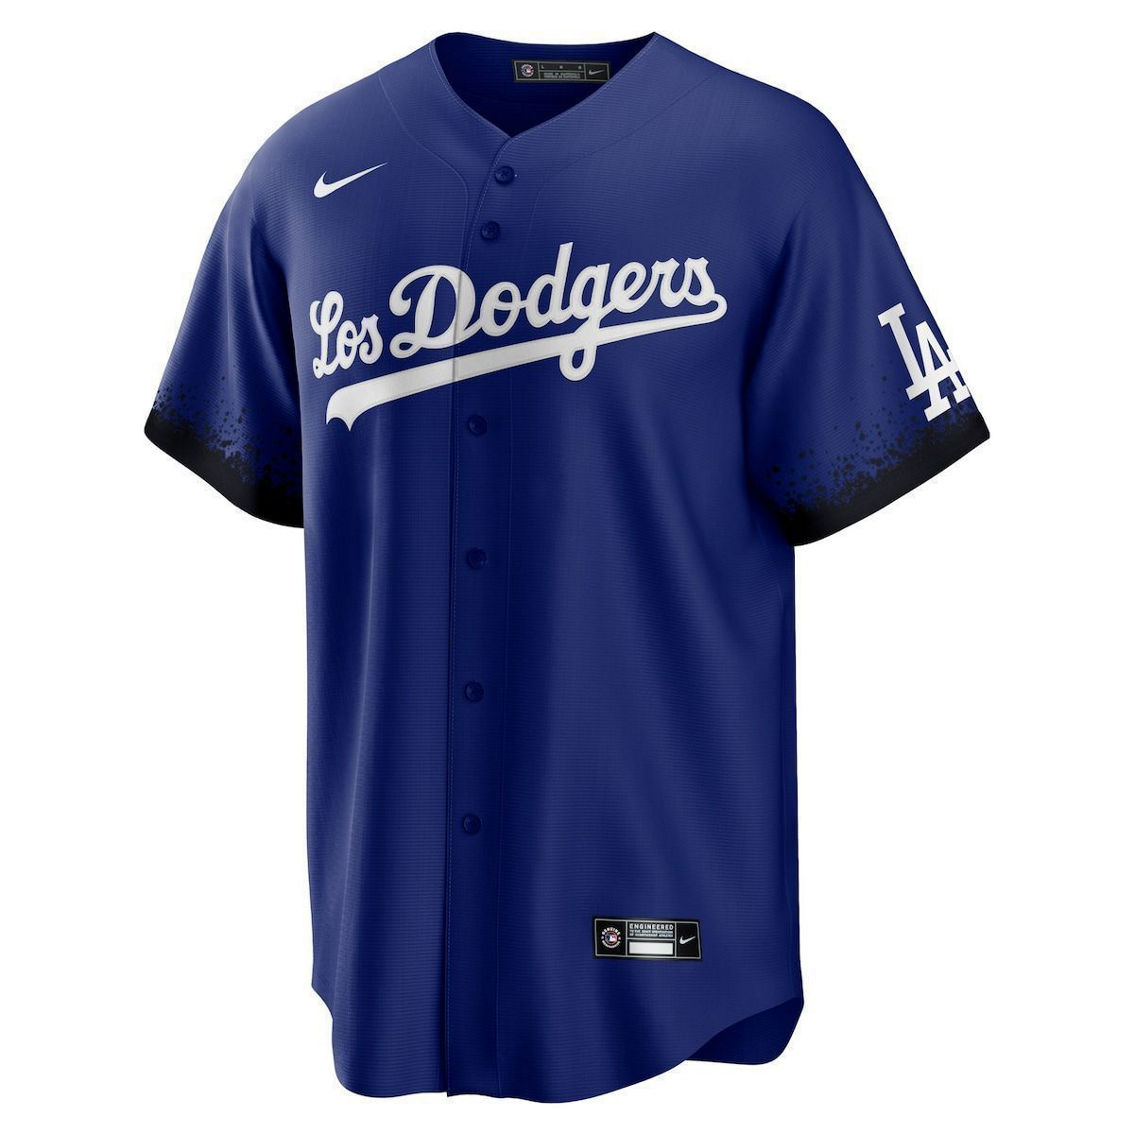 Nike Men's Royal Los Angeles Dodgers City Connect Replica Jersey - Image 3 of 4